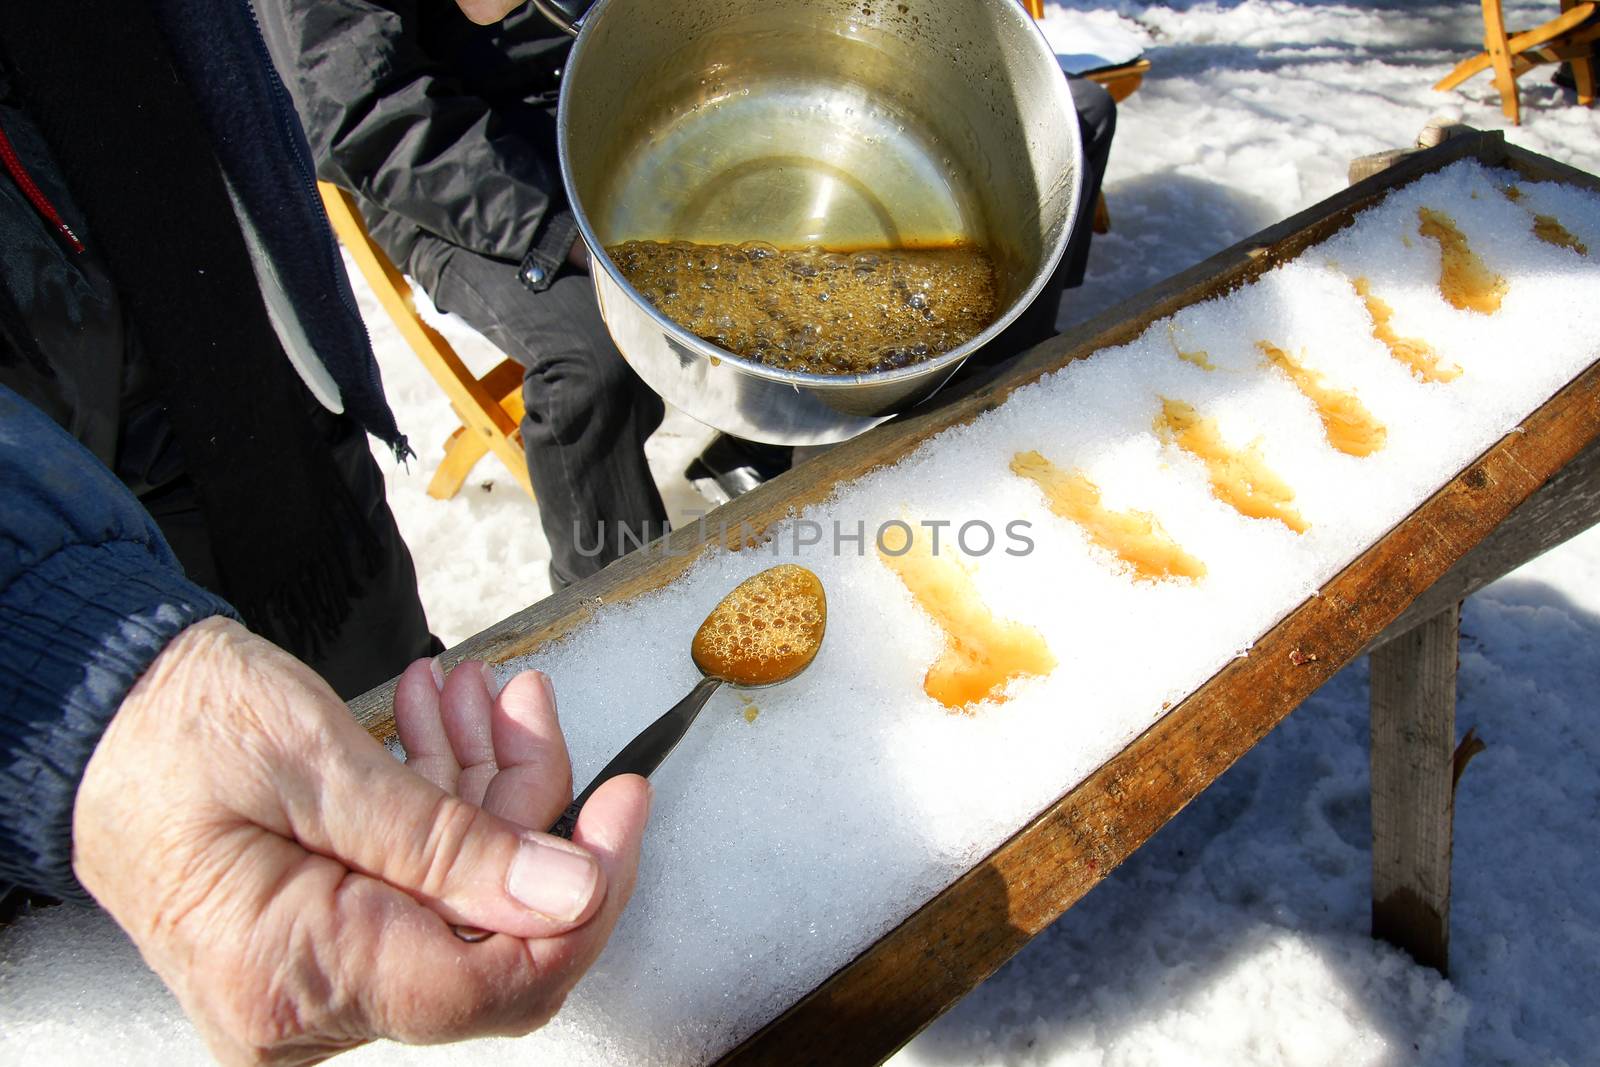 Making maple toffee by Mirage3